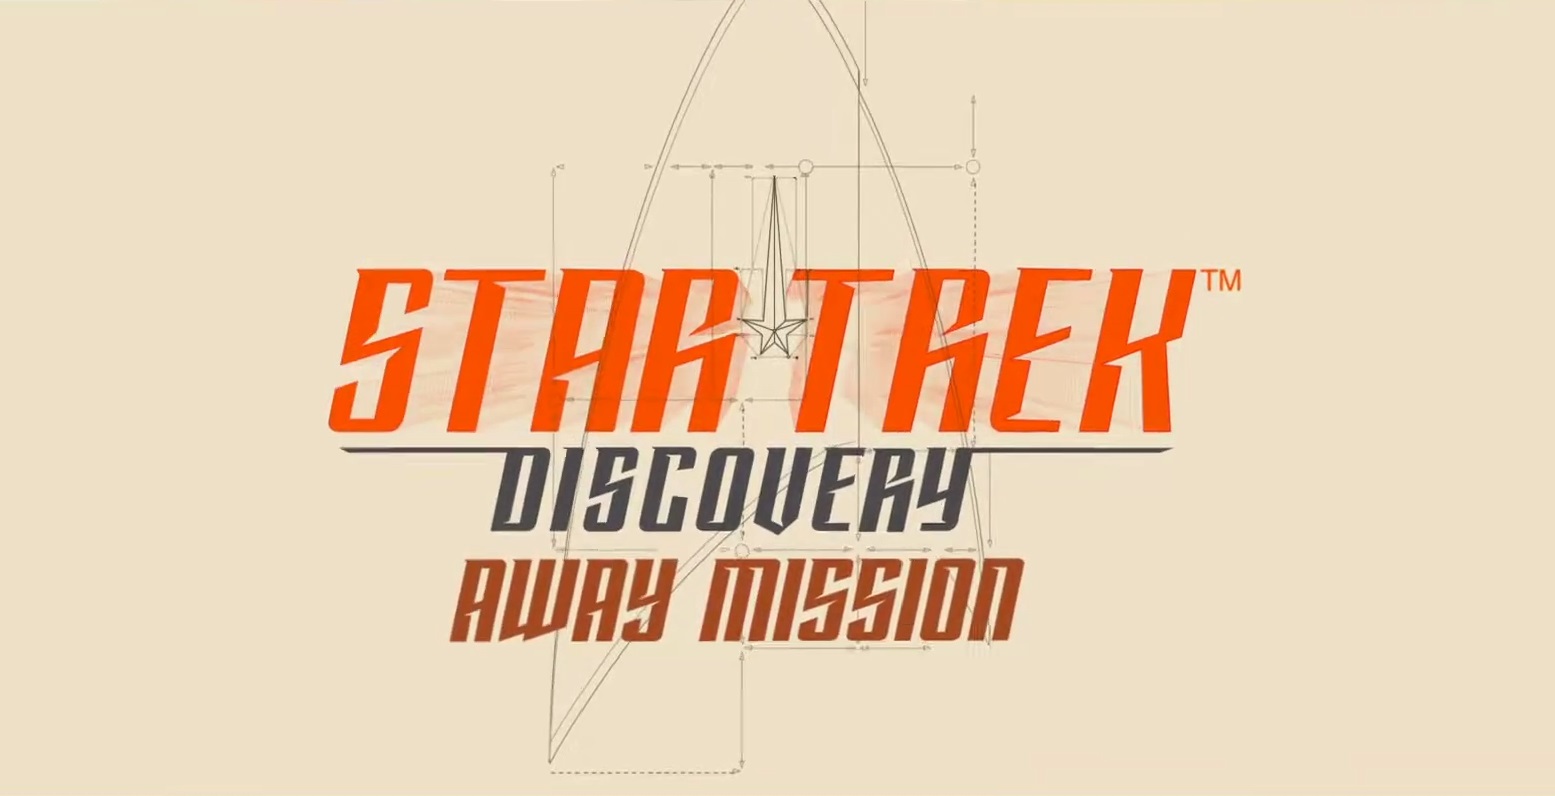 Star Trek Discovery Away Mission